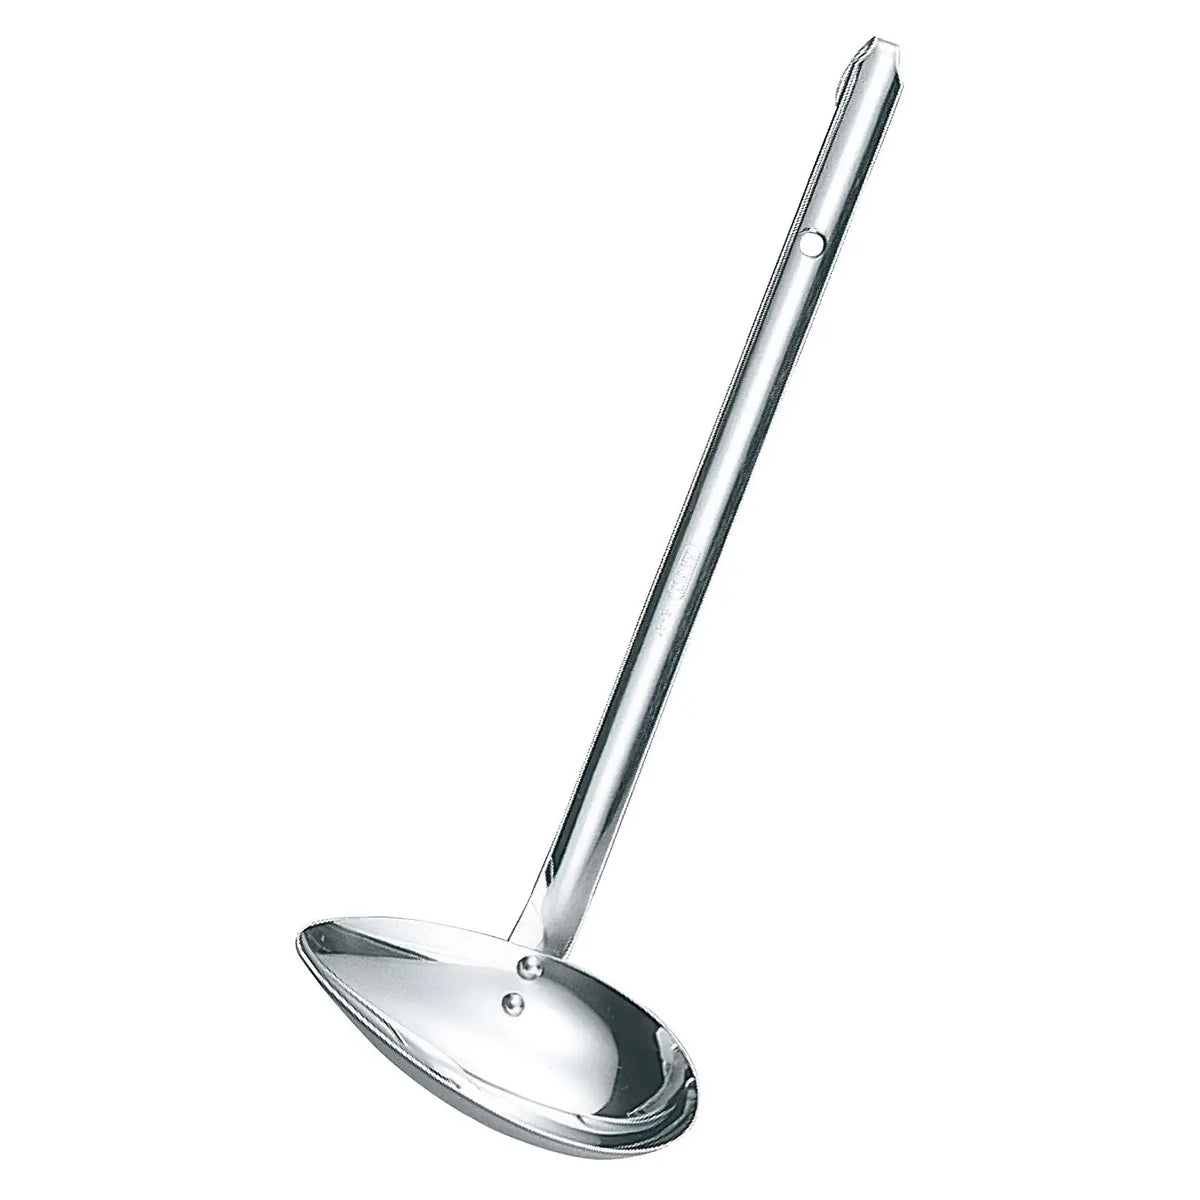 MARUTAMA Stainless Steel Side-Scooping Ladle for Left-Handed